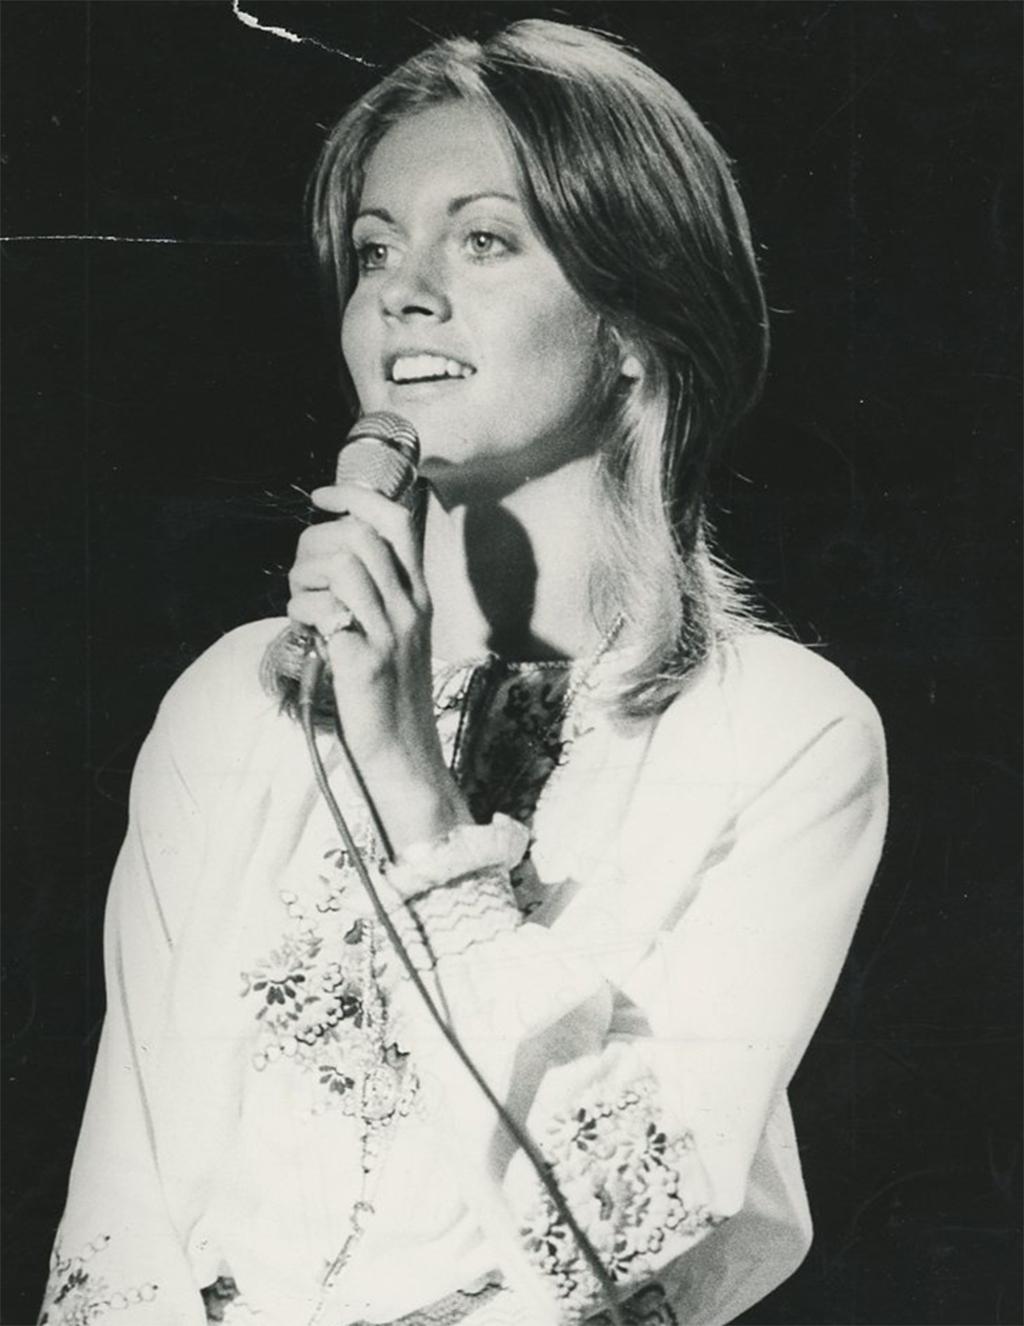 Olivia Newton John Portrait of her Singing in 1972  - Photograph by Unknown